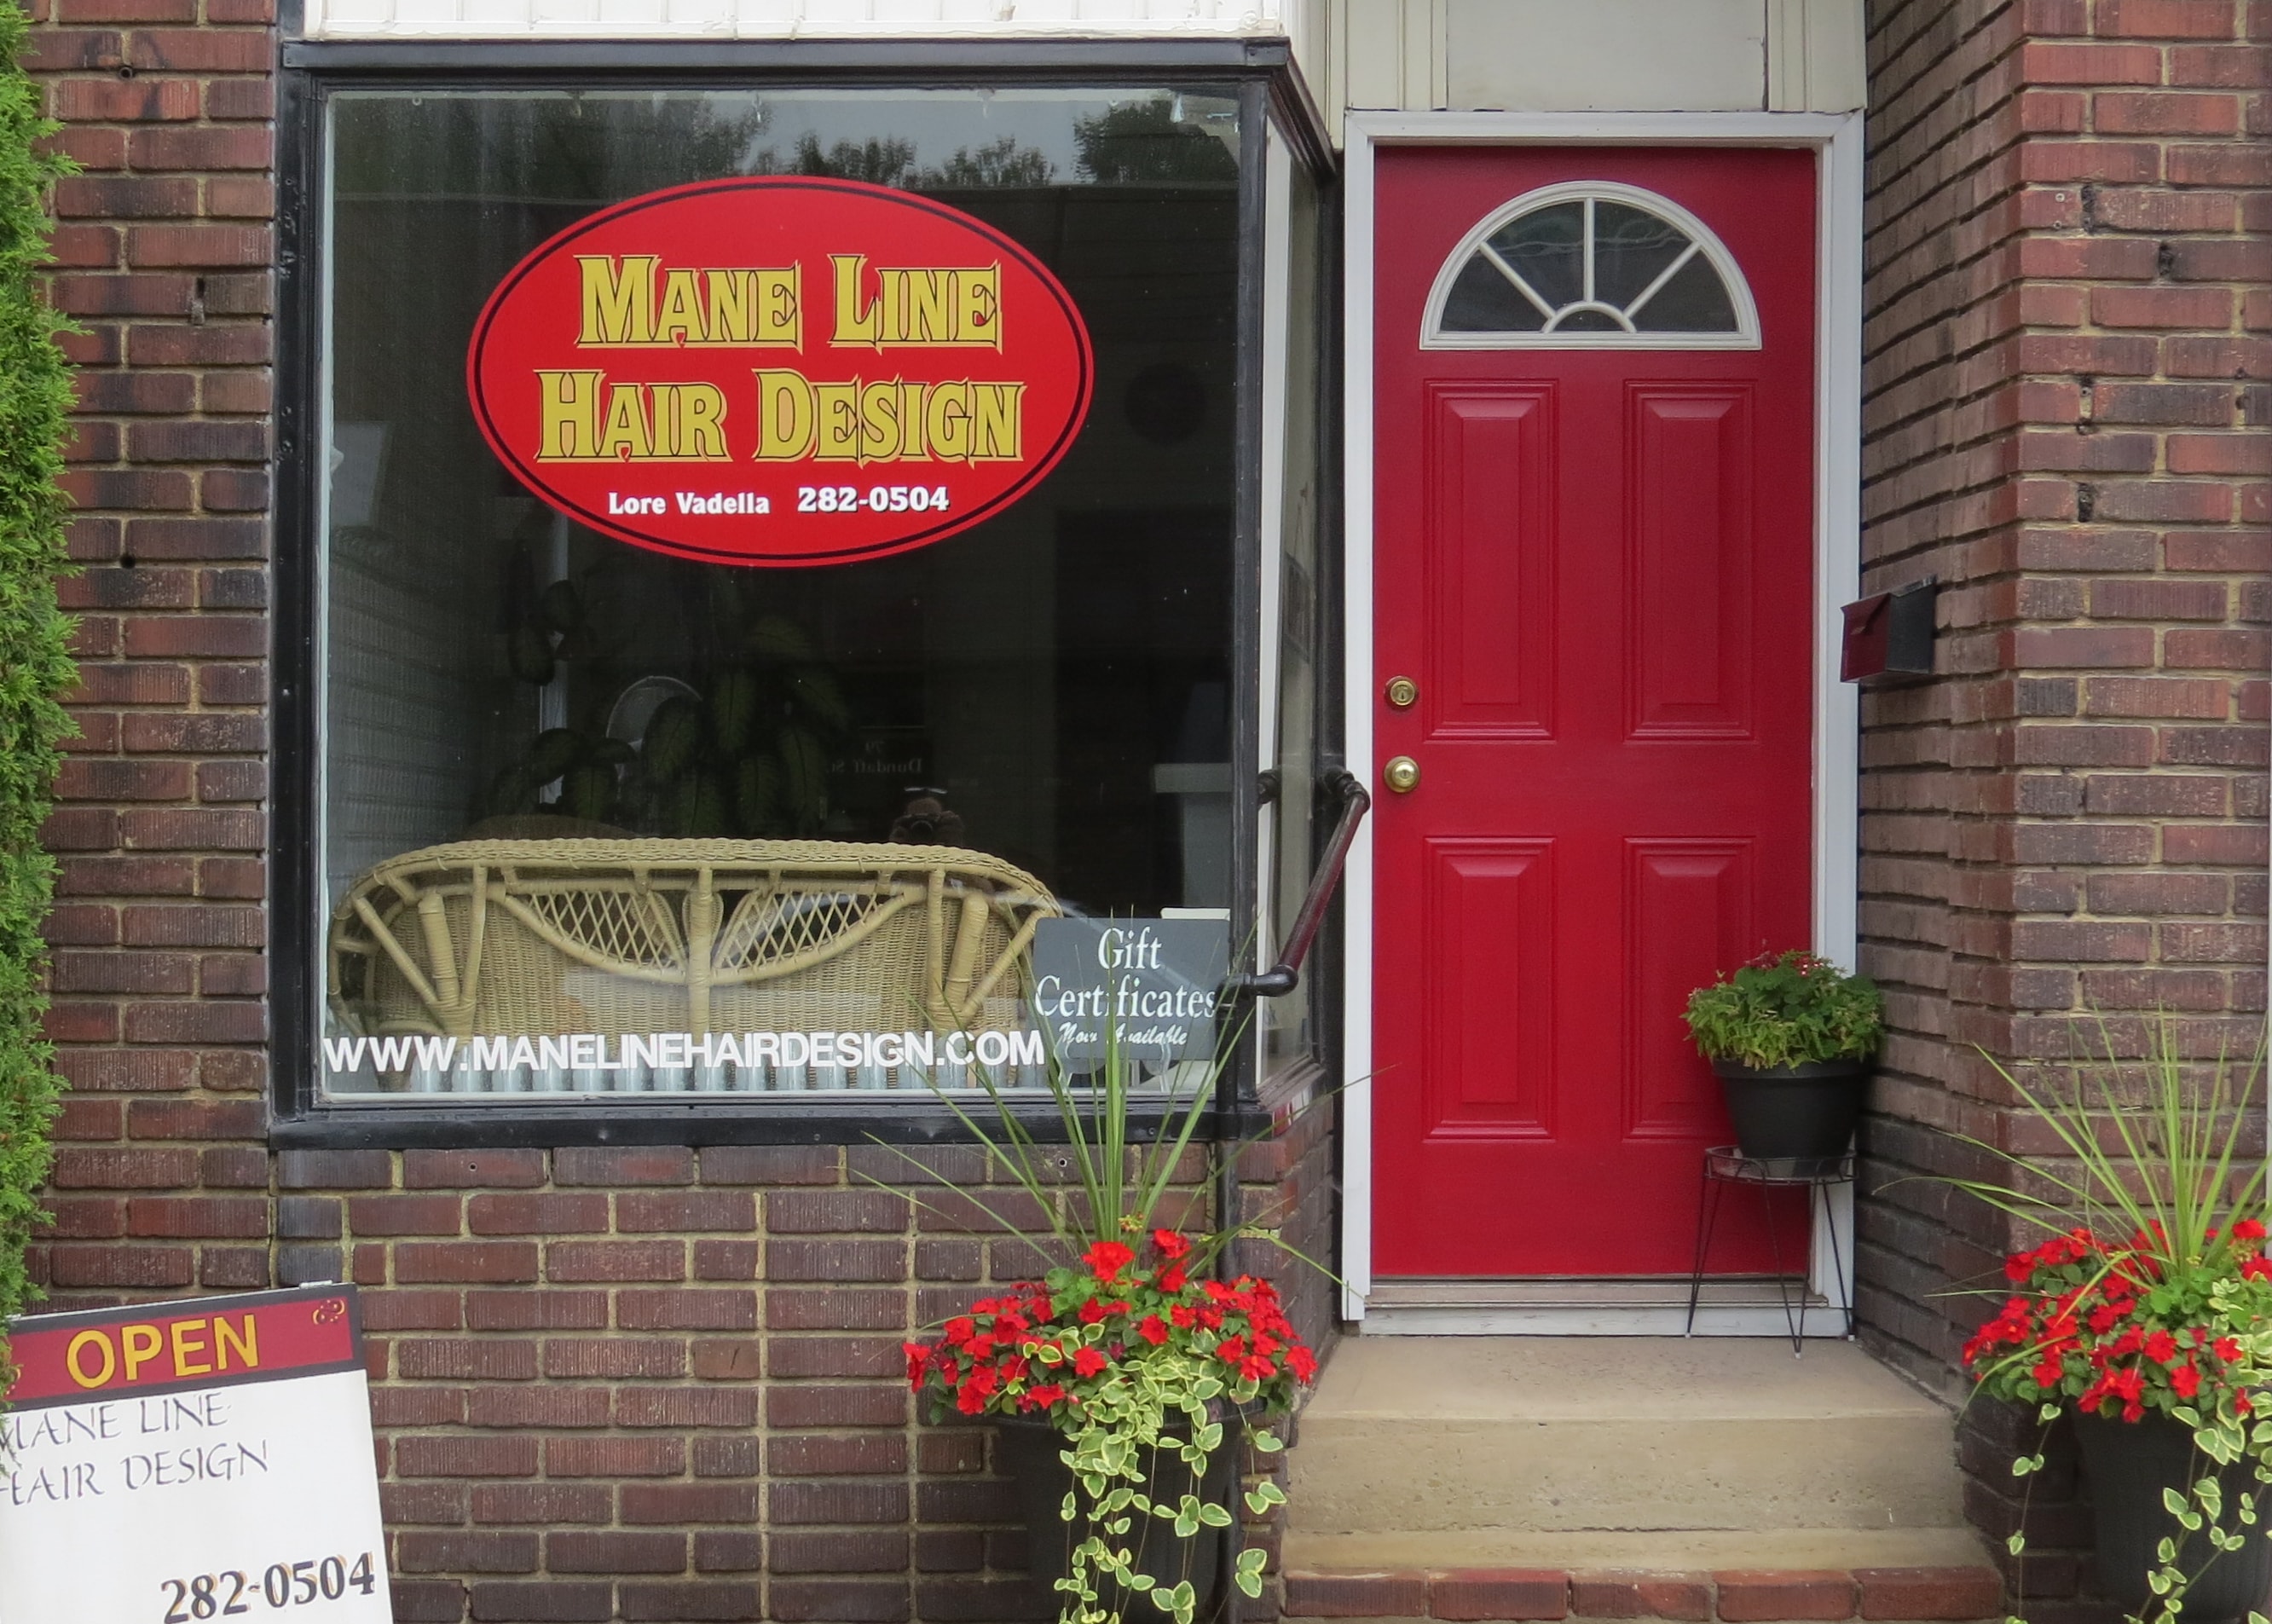 Image of the outside of Mane Line Hair Design